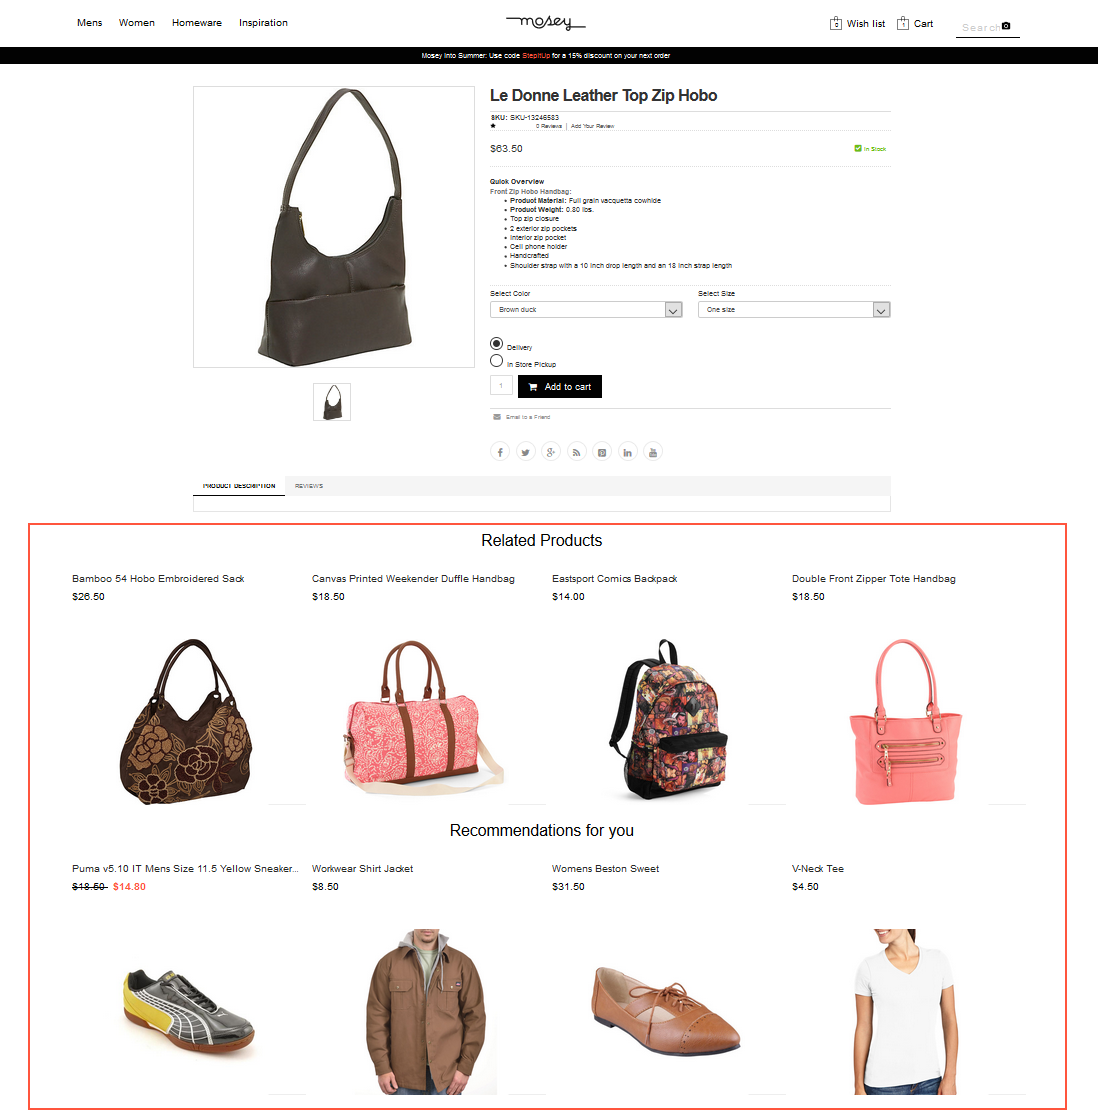 Image: Product recommendations on a shop site